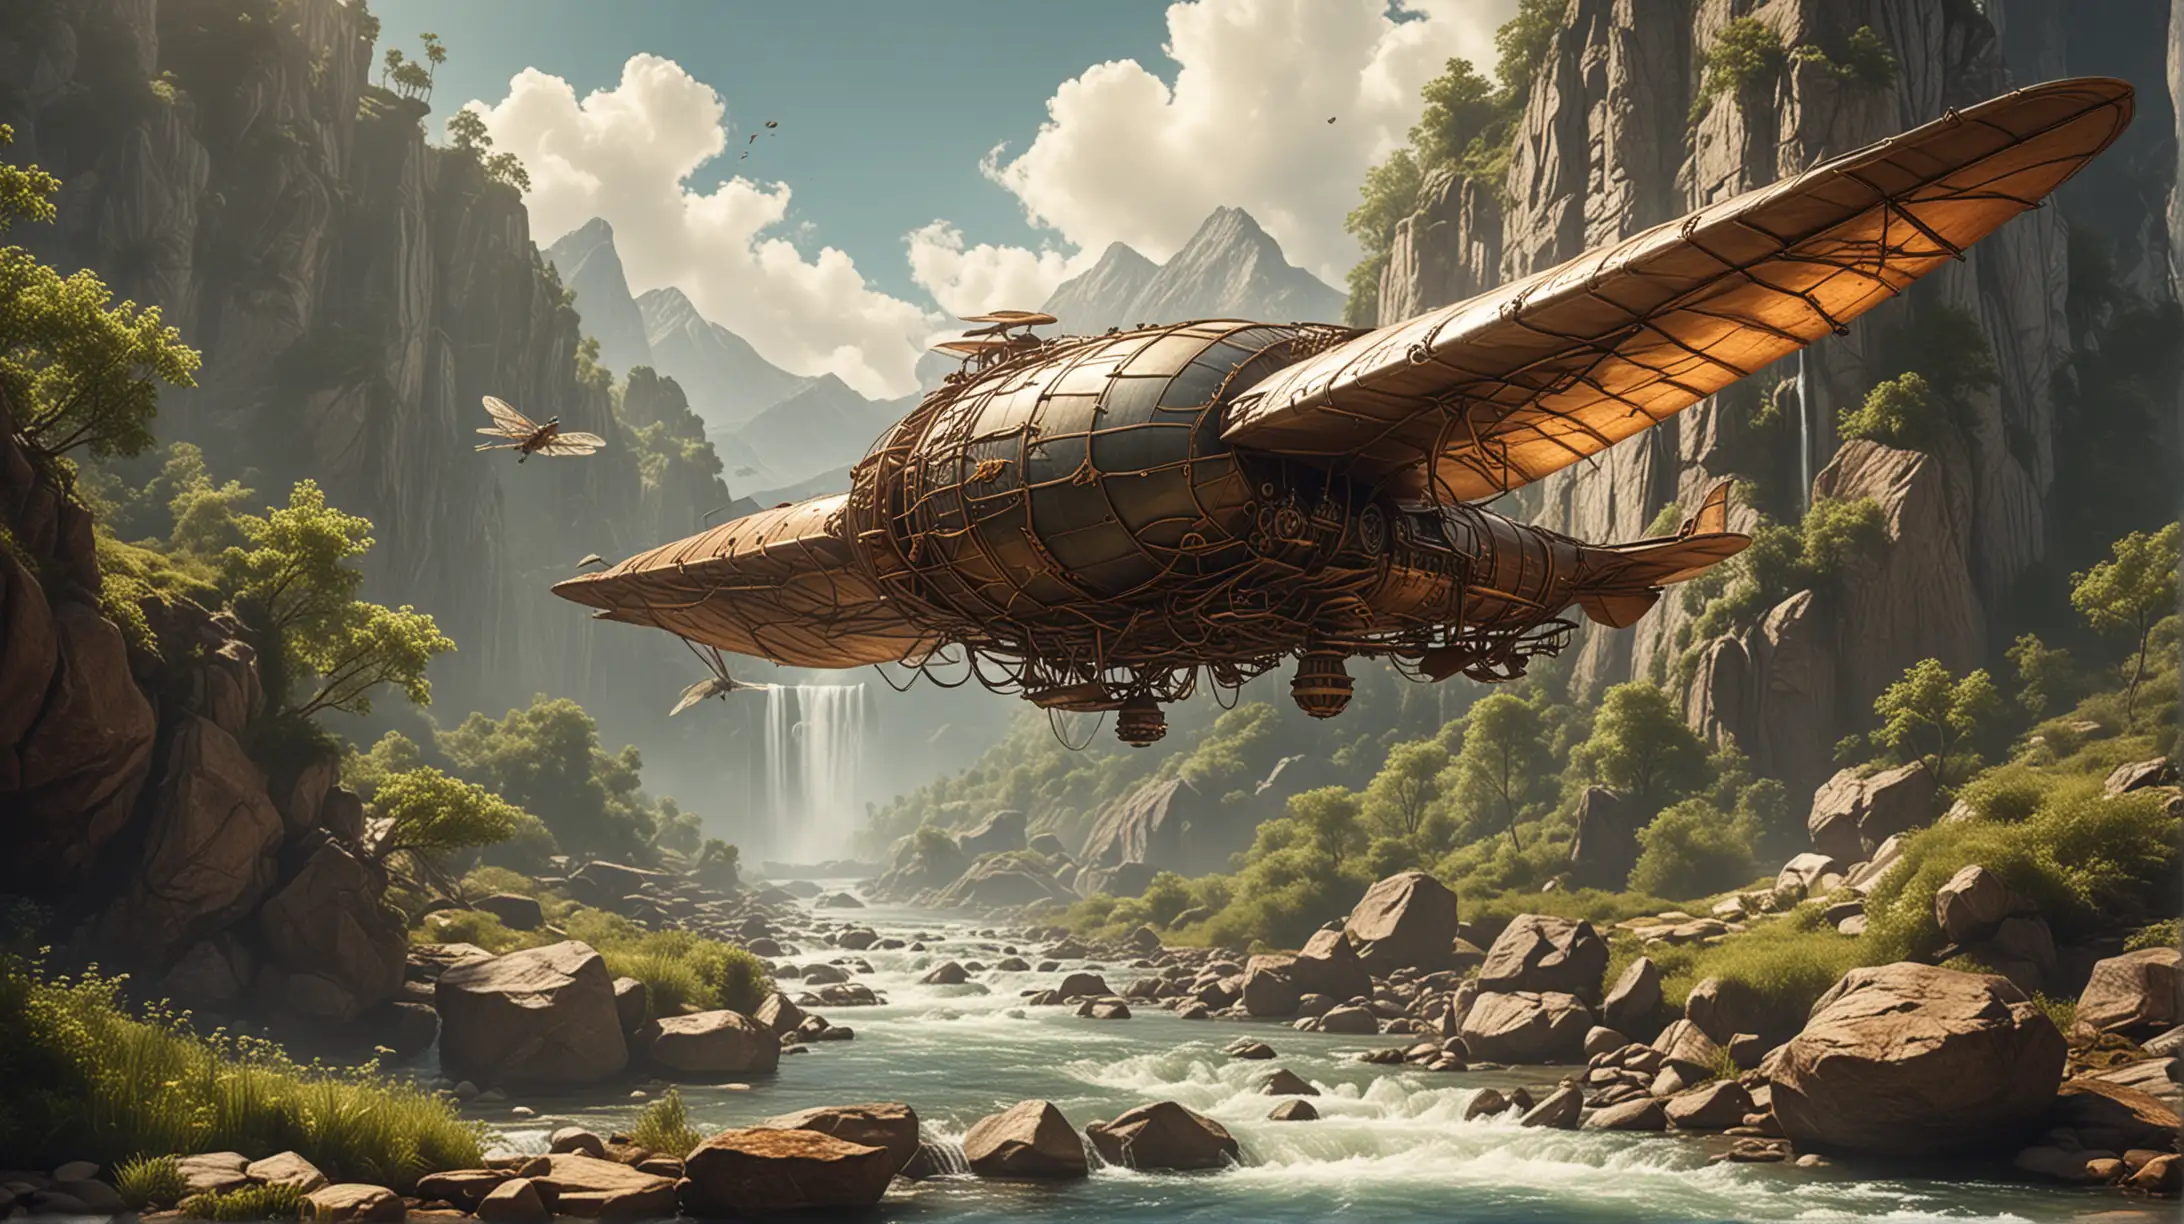 Steampunk Dragonfly Airship Soaring Over Sunlit Mountain Stream